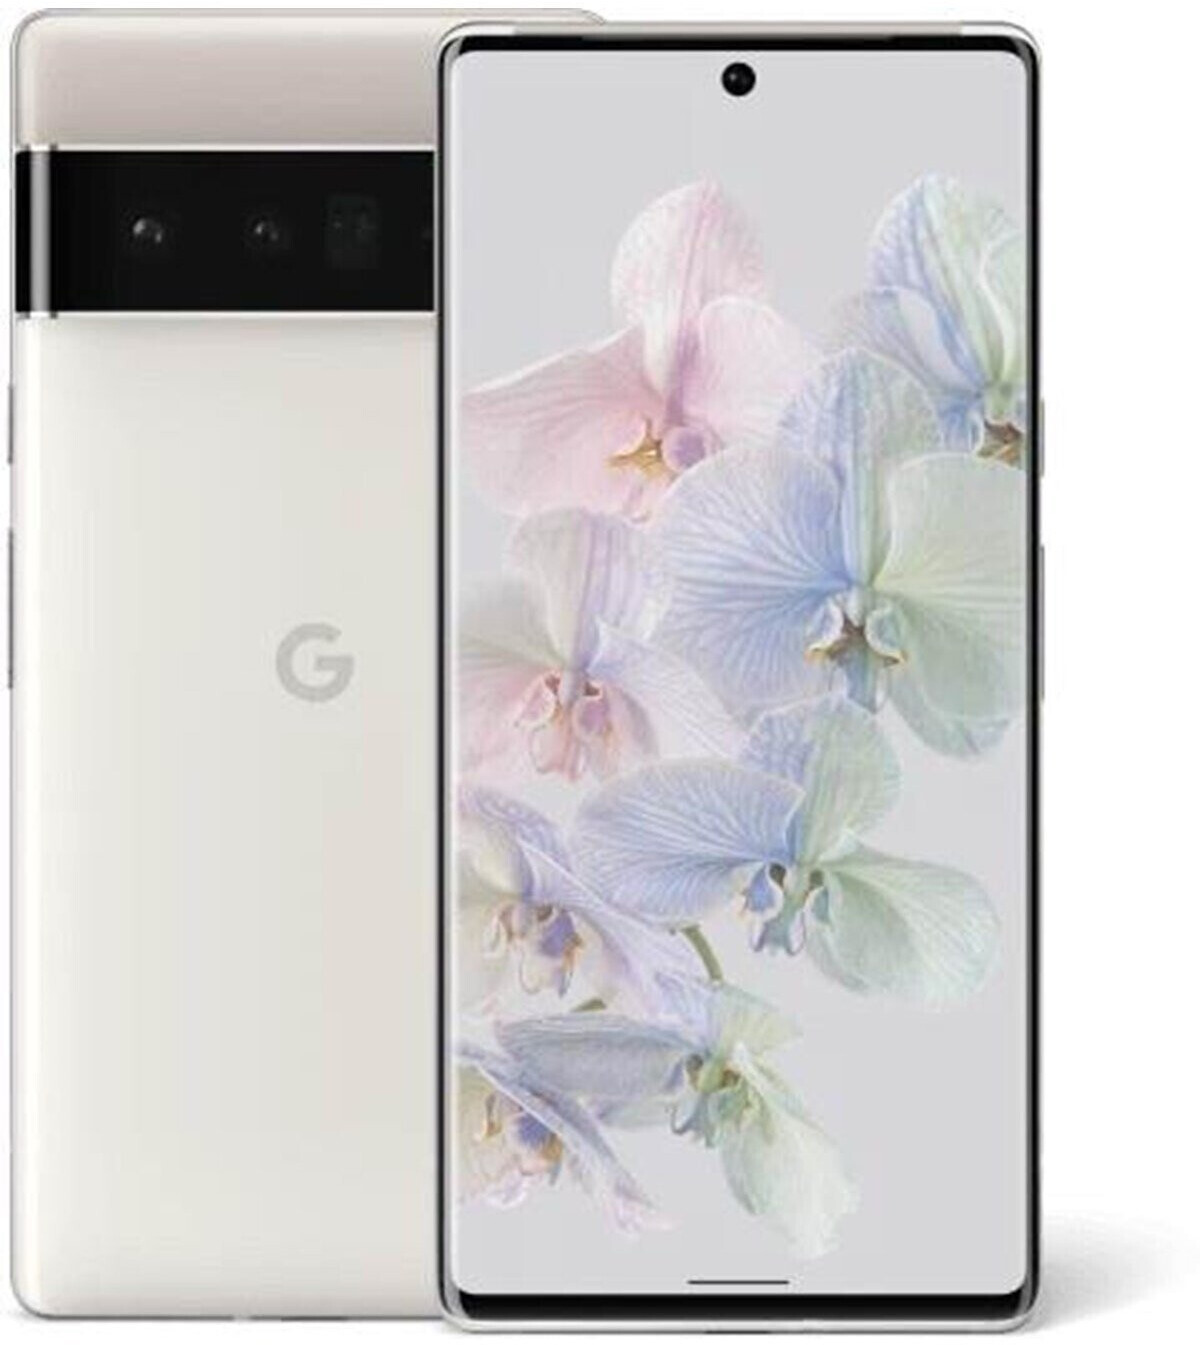 Buy Google Pixel 6 Pro 128GB Cloudy White from £699.00 (Today